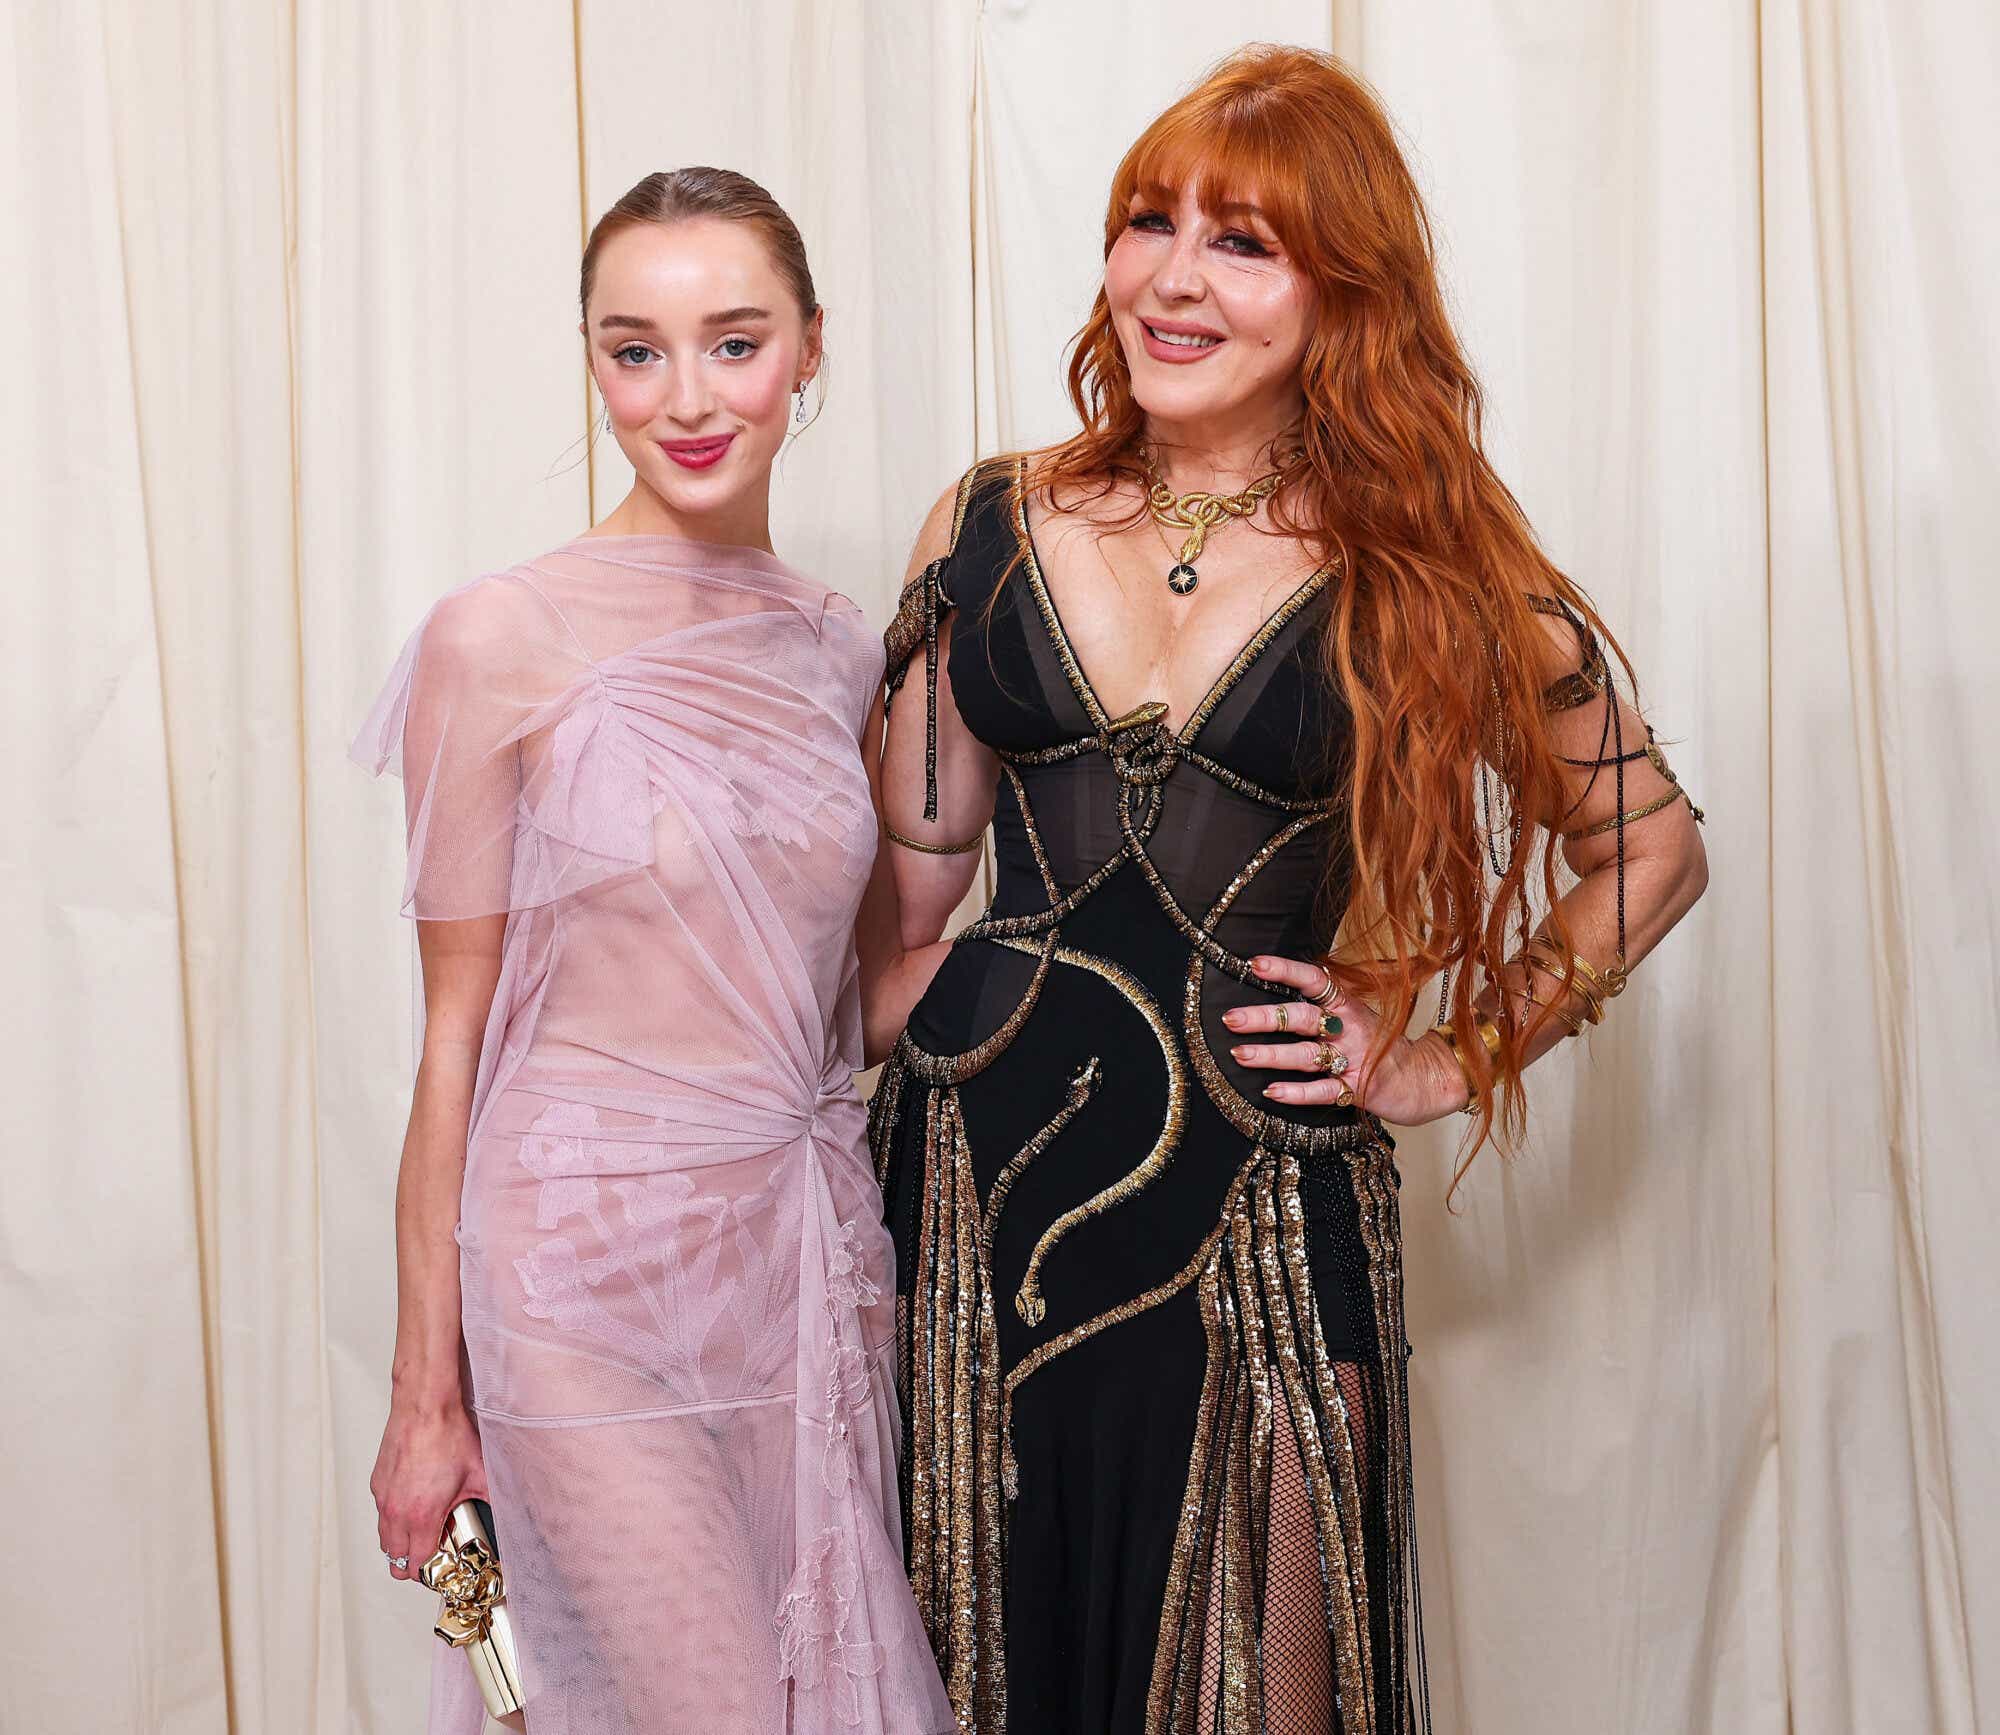 Phoebe Dynevor (R) wears a sheer pale pink tulle dress with embroidered flower detail, while Charlotte Tilbury wears a sheer corseted black dress with gold edging.